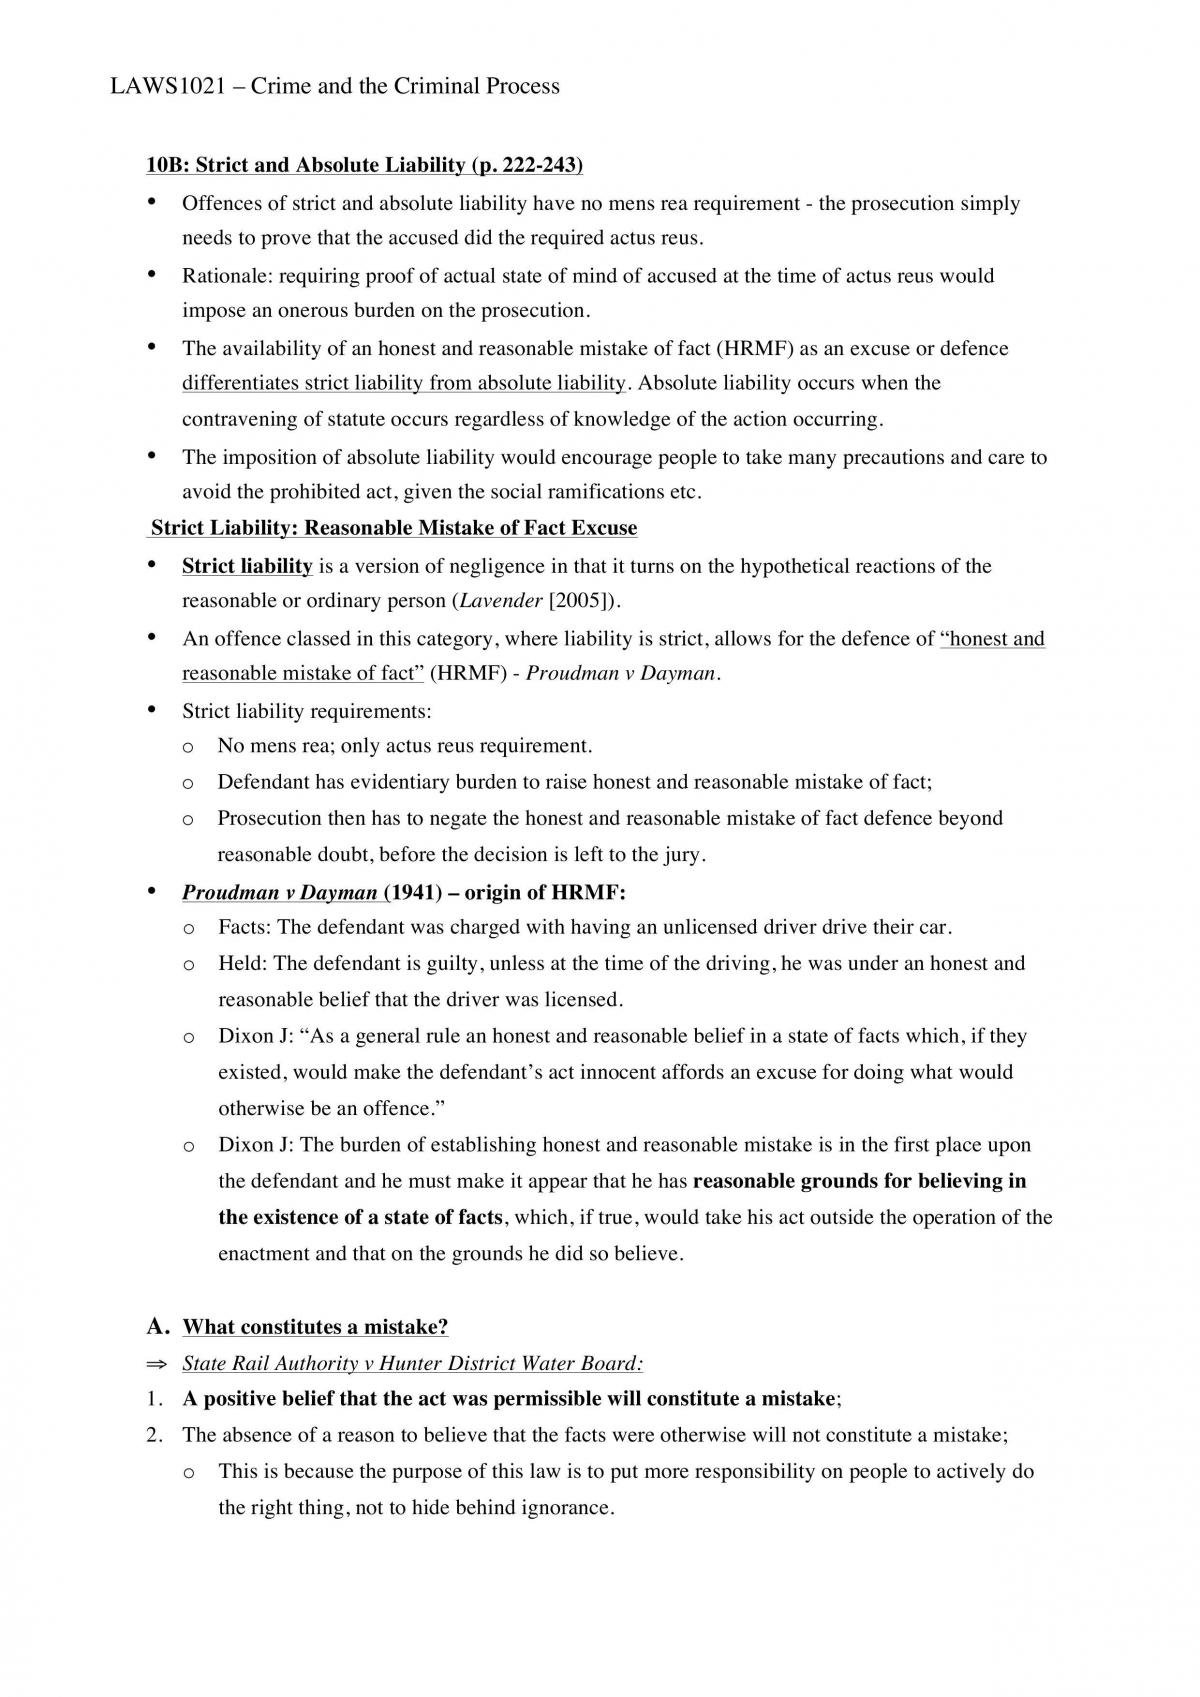 Complete Notes for LAWS1021 Crime and the Criminal Process - Page 108